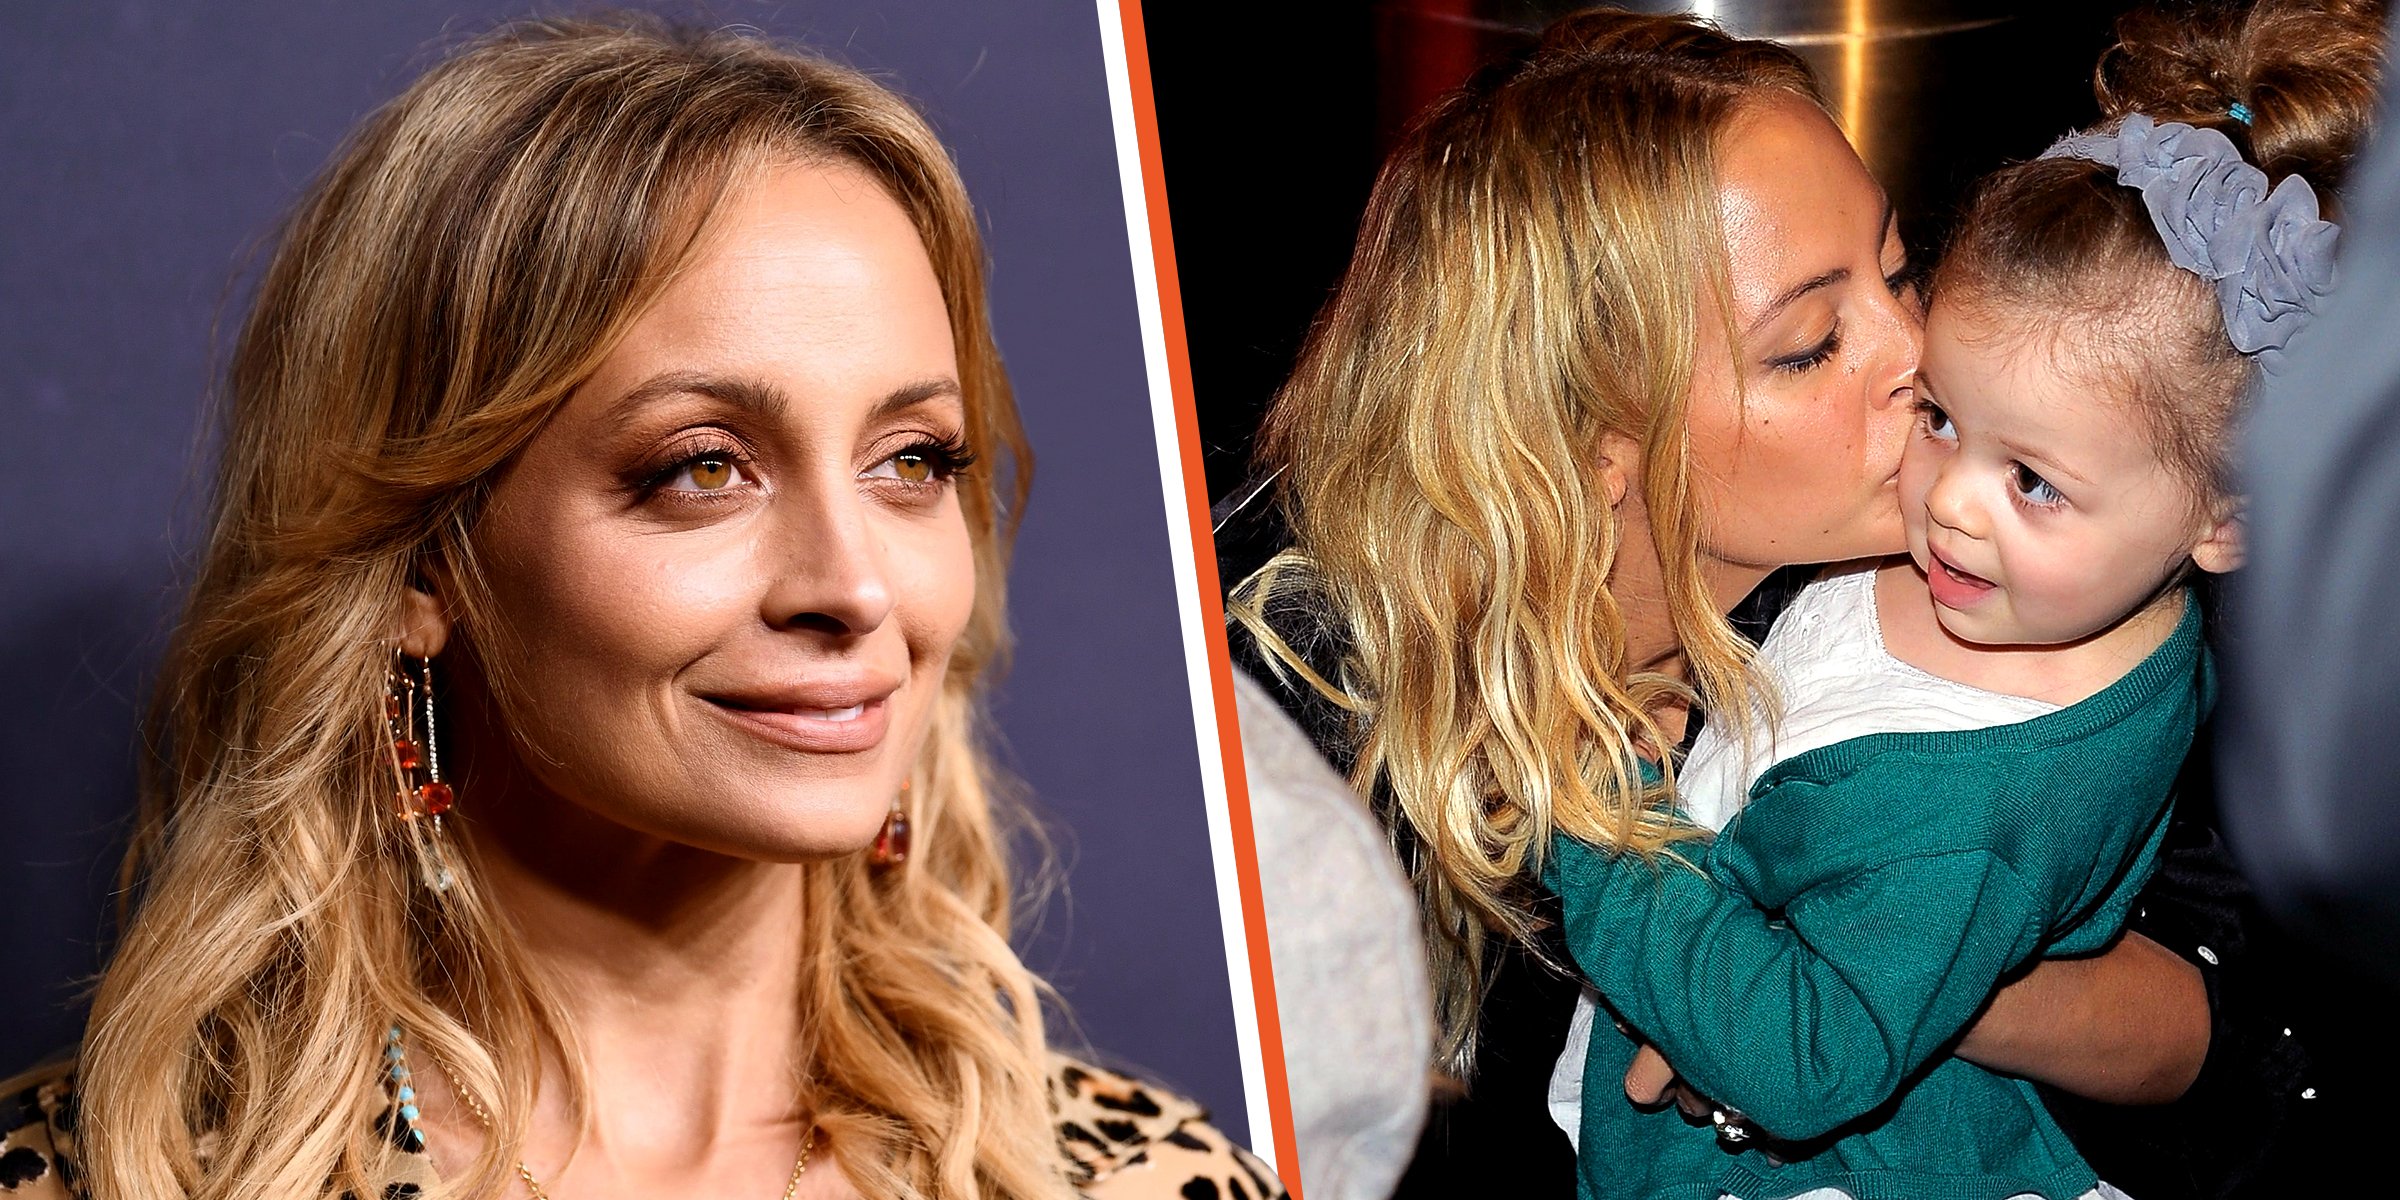 Nicole Richie | Nicole Richie and Harlow Madden | Source: Getty Images